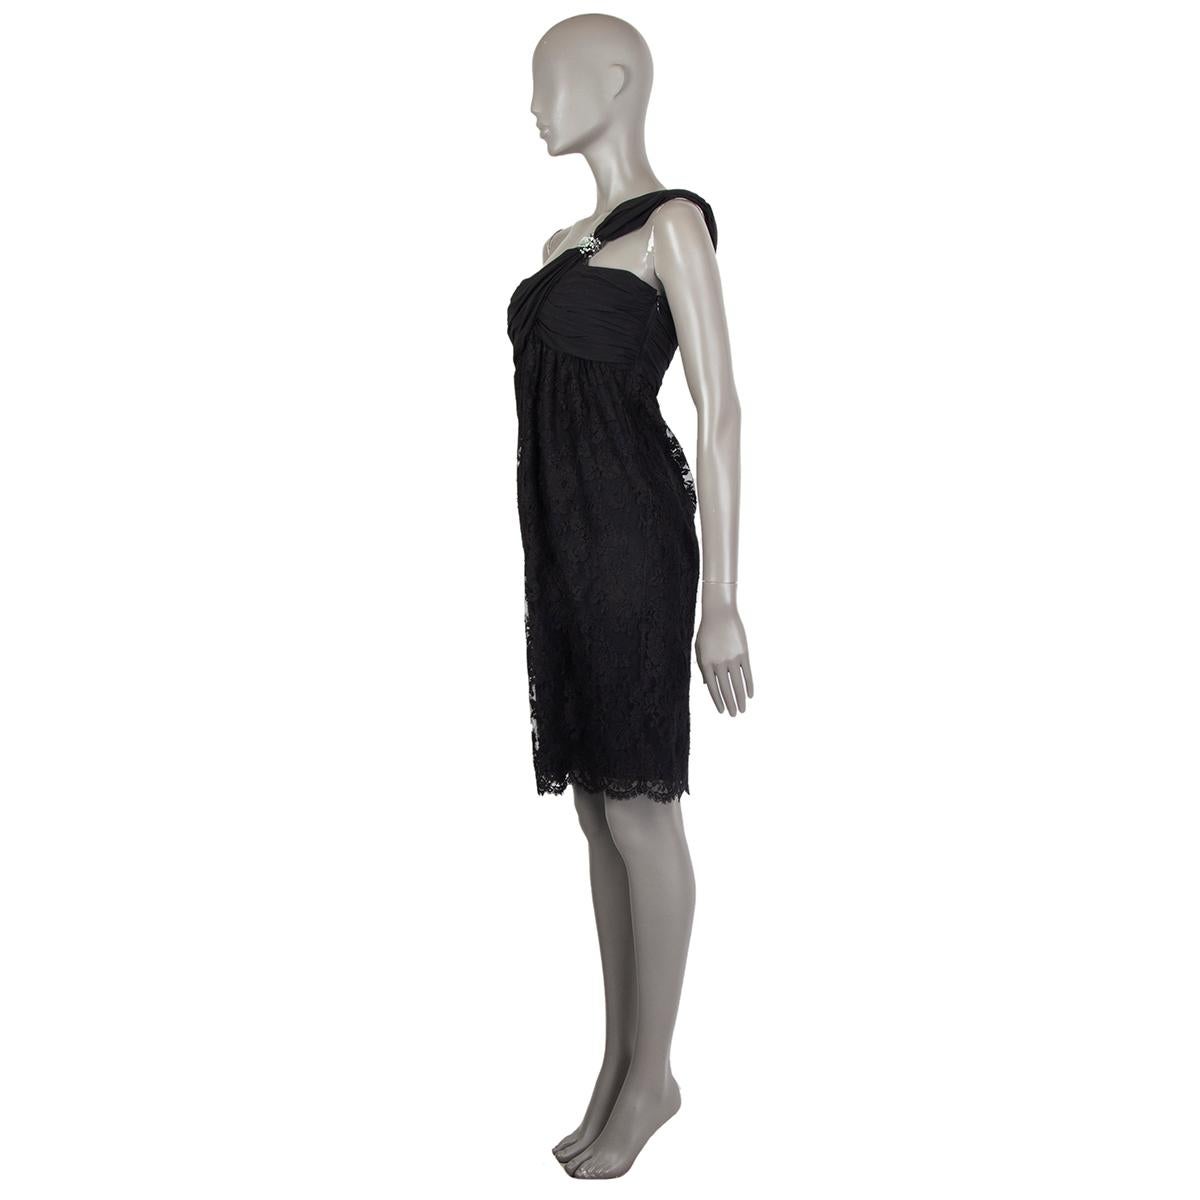 Valentino one-shoulder lace dress in black cotton (77%), nylon (23%) and silk (100%). With draped shoulder and rhinestone and bead application on the strap. Closes with hook and invisible zipper on the side. Lined in black silk (100%). Has been worn